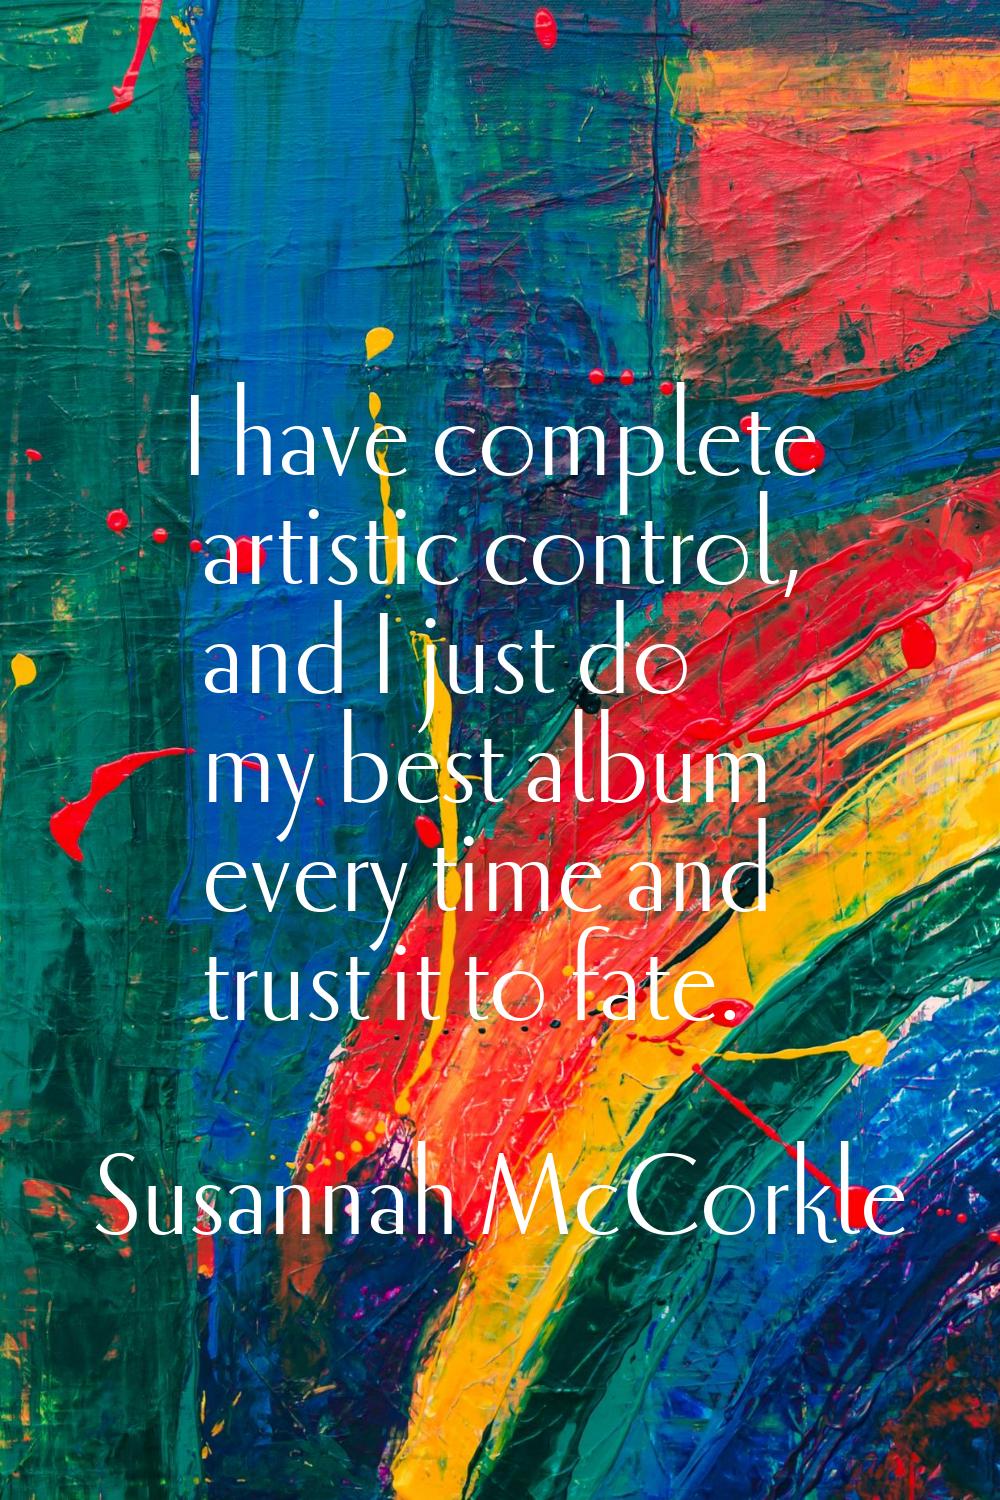 I have complete artistic control, and I just do my best album every time and trust it to fate.